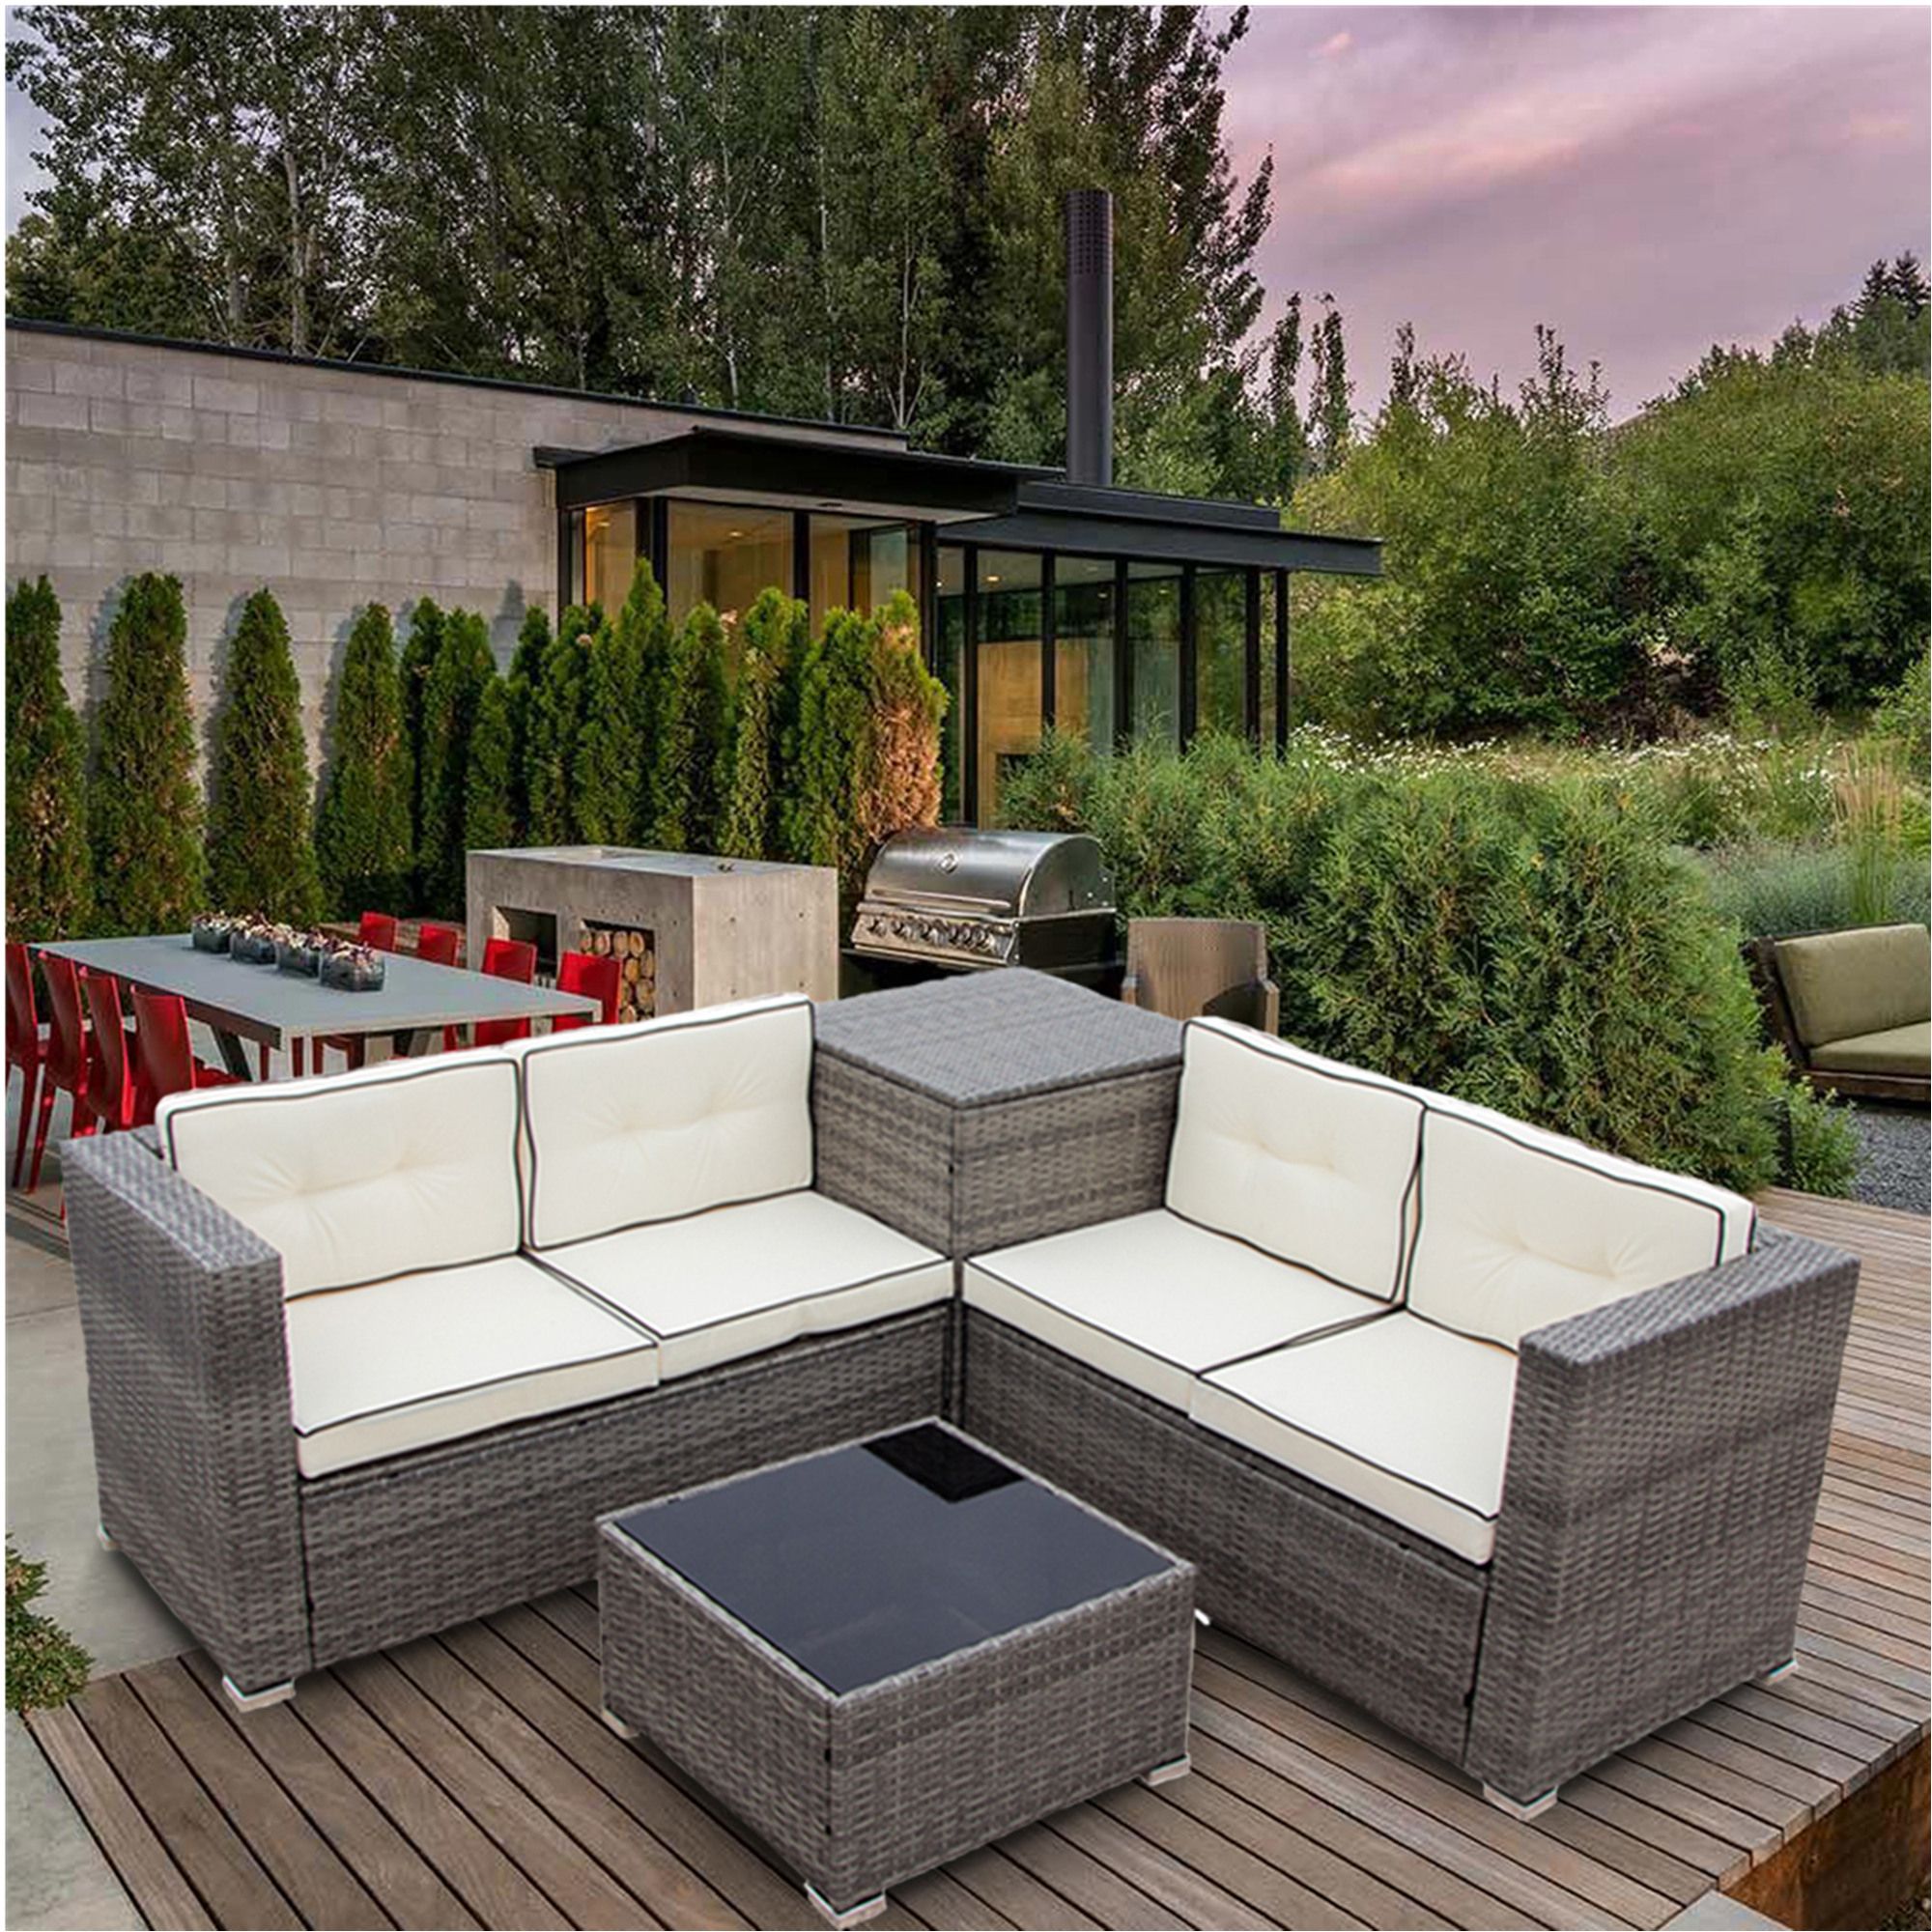 4 Piece Rattan Patio Furniture Sets Clearance, Wicker Bistro Patio Set With 4 Piece Outdoor Wicker Seating Sets (View 1 of 15)